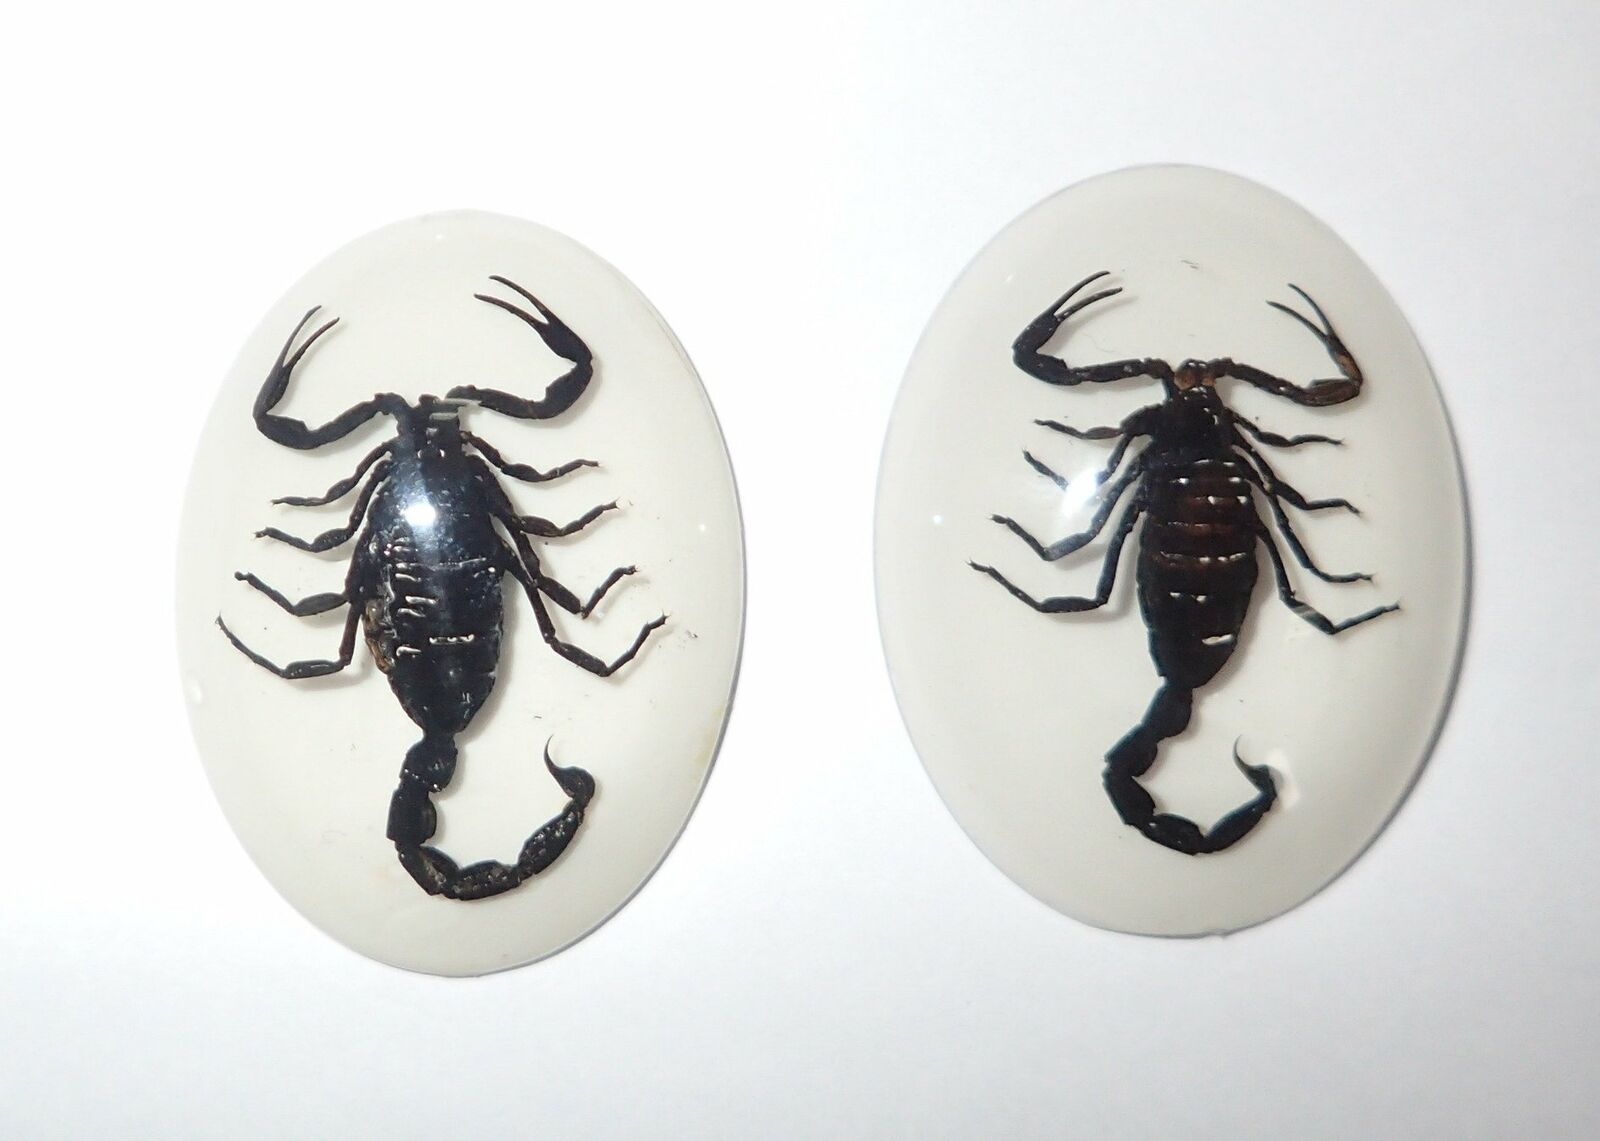 Insect Cabochon Black Scorpion Specimen Oval 30x40 mm on White 2 pieces Lot